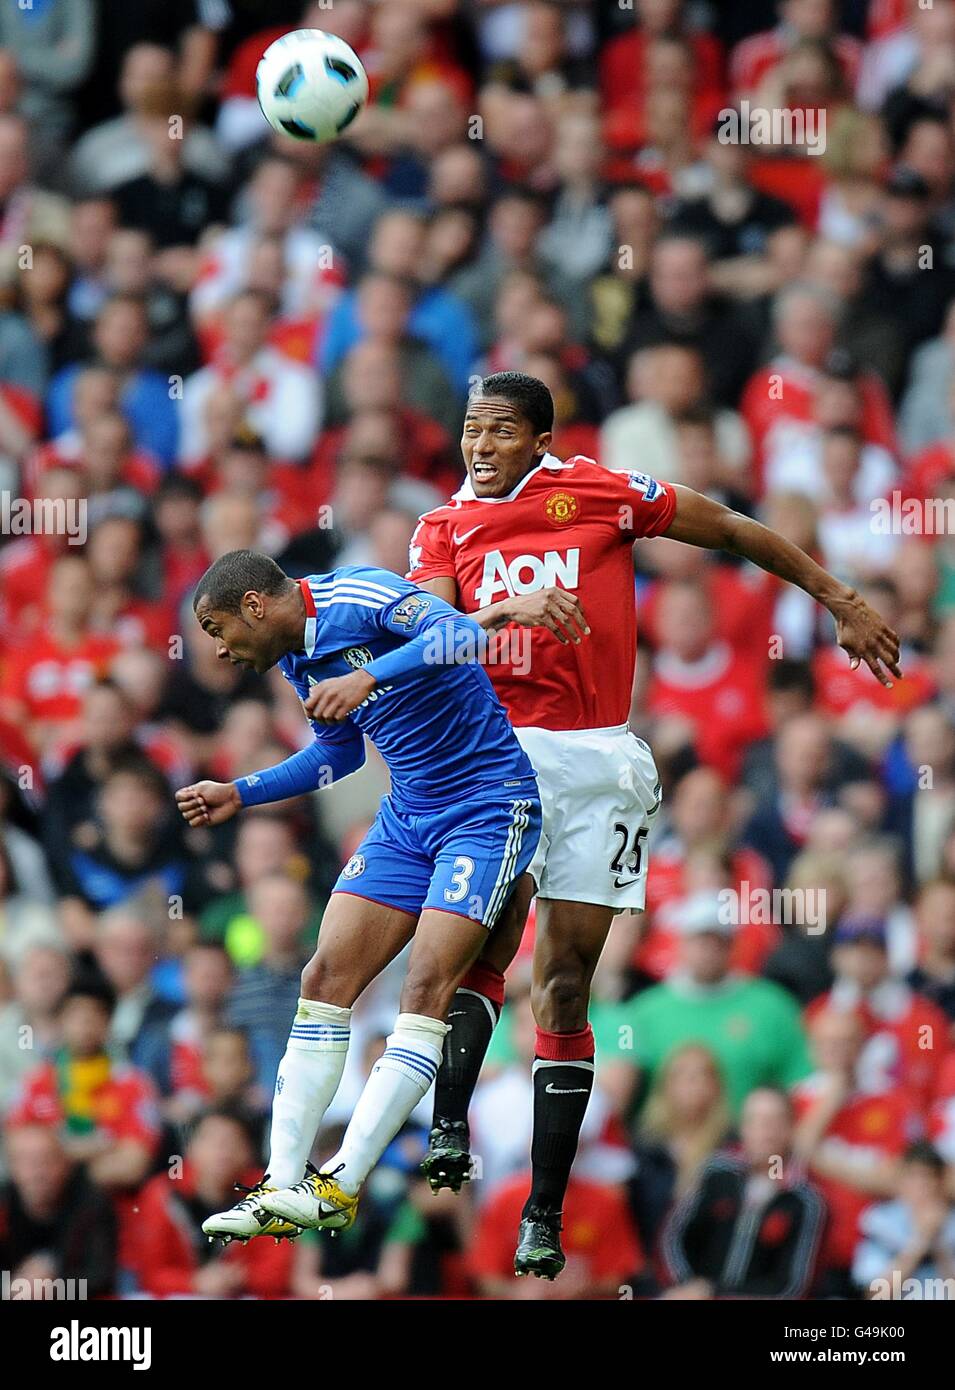 Manchester United's Antonio Valencia (right) and Chelsea's Ashley Cole (left) battle for the ball in the air Stock Photo